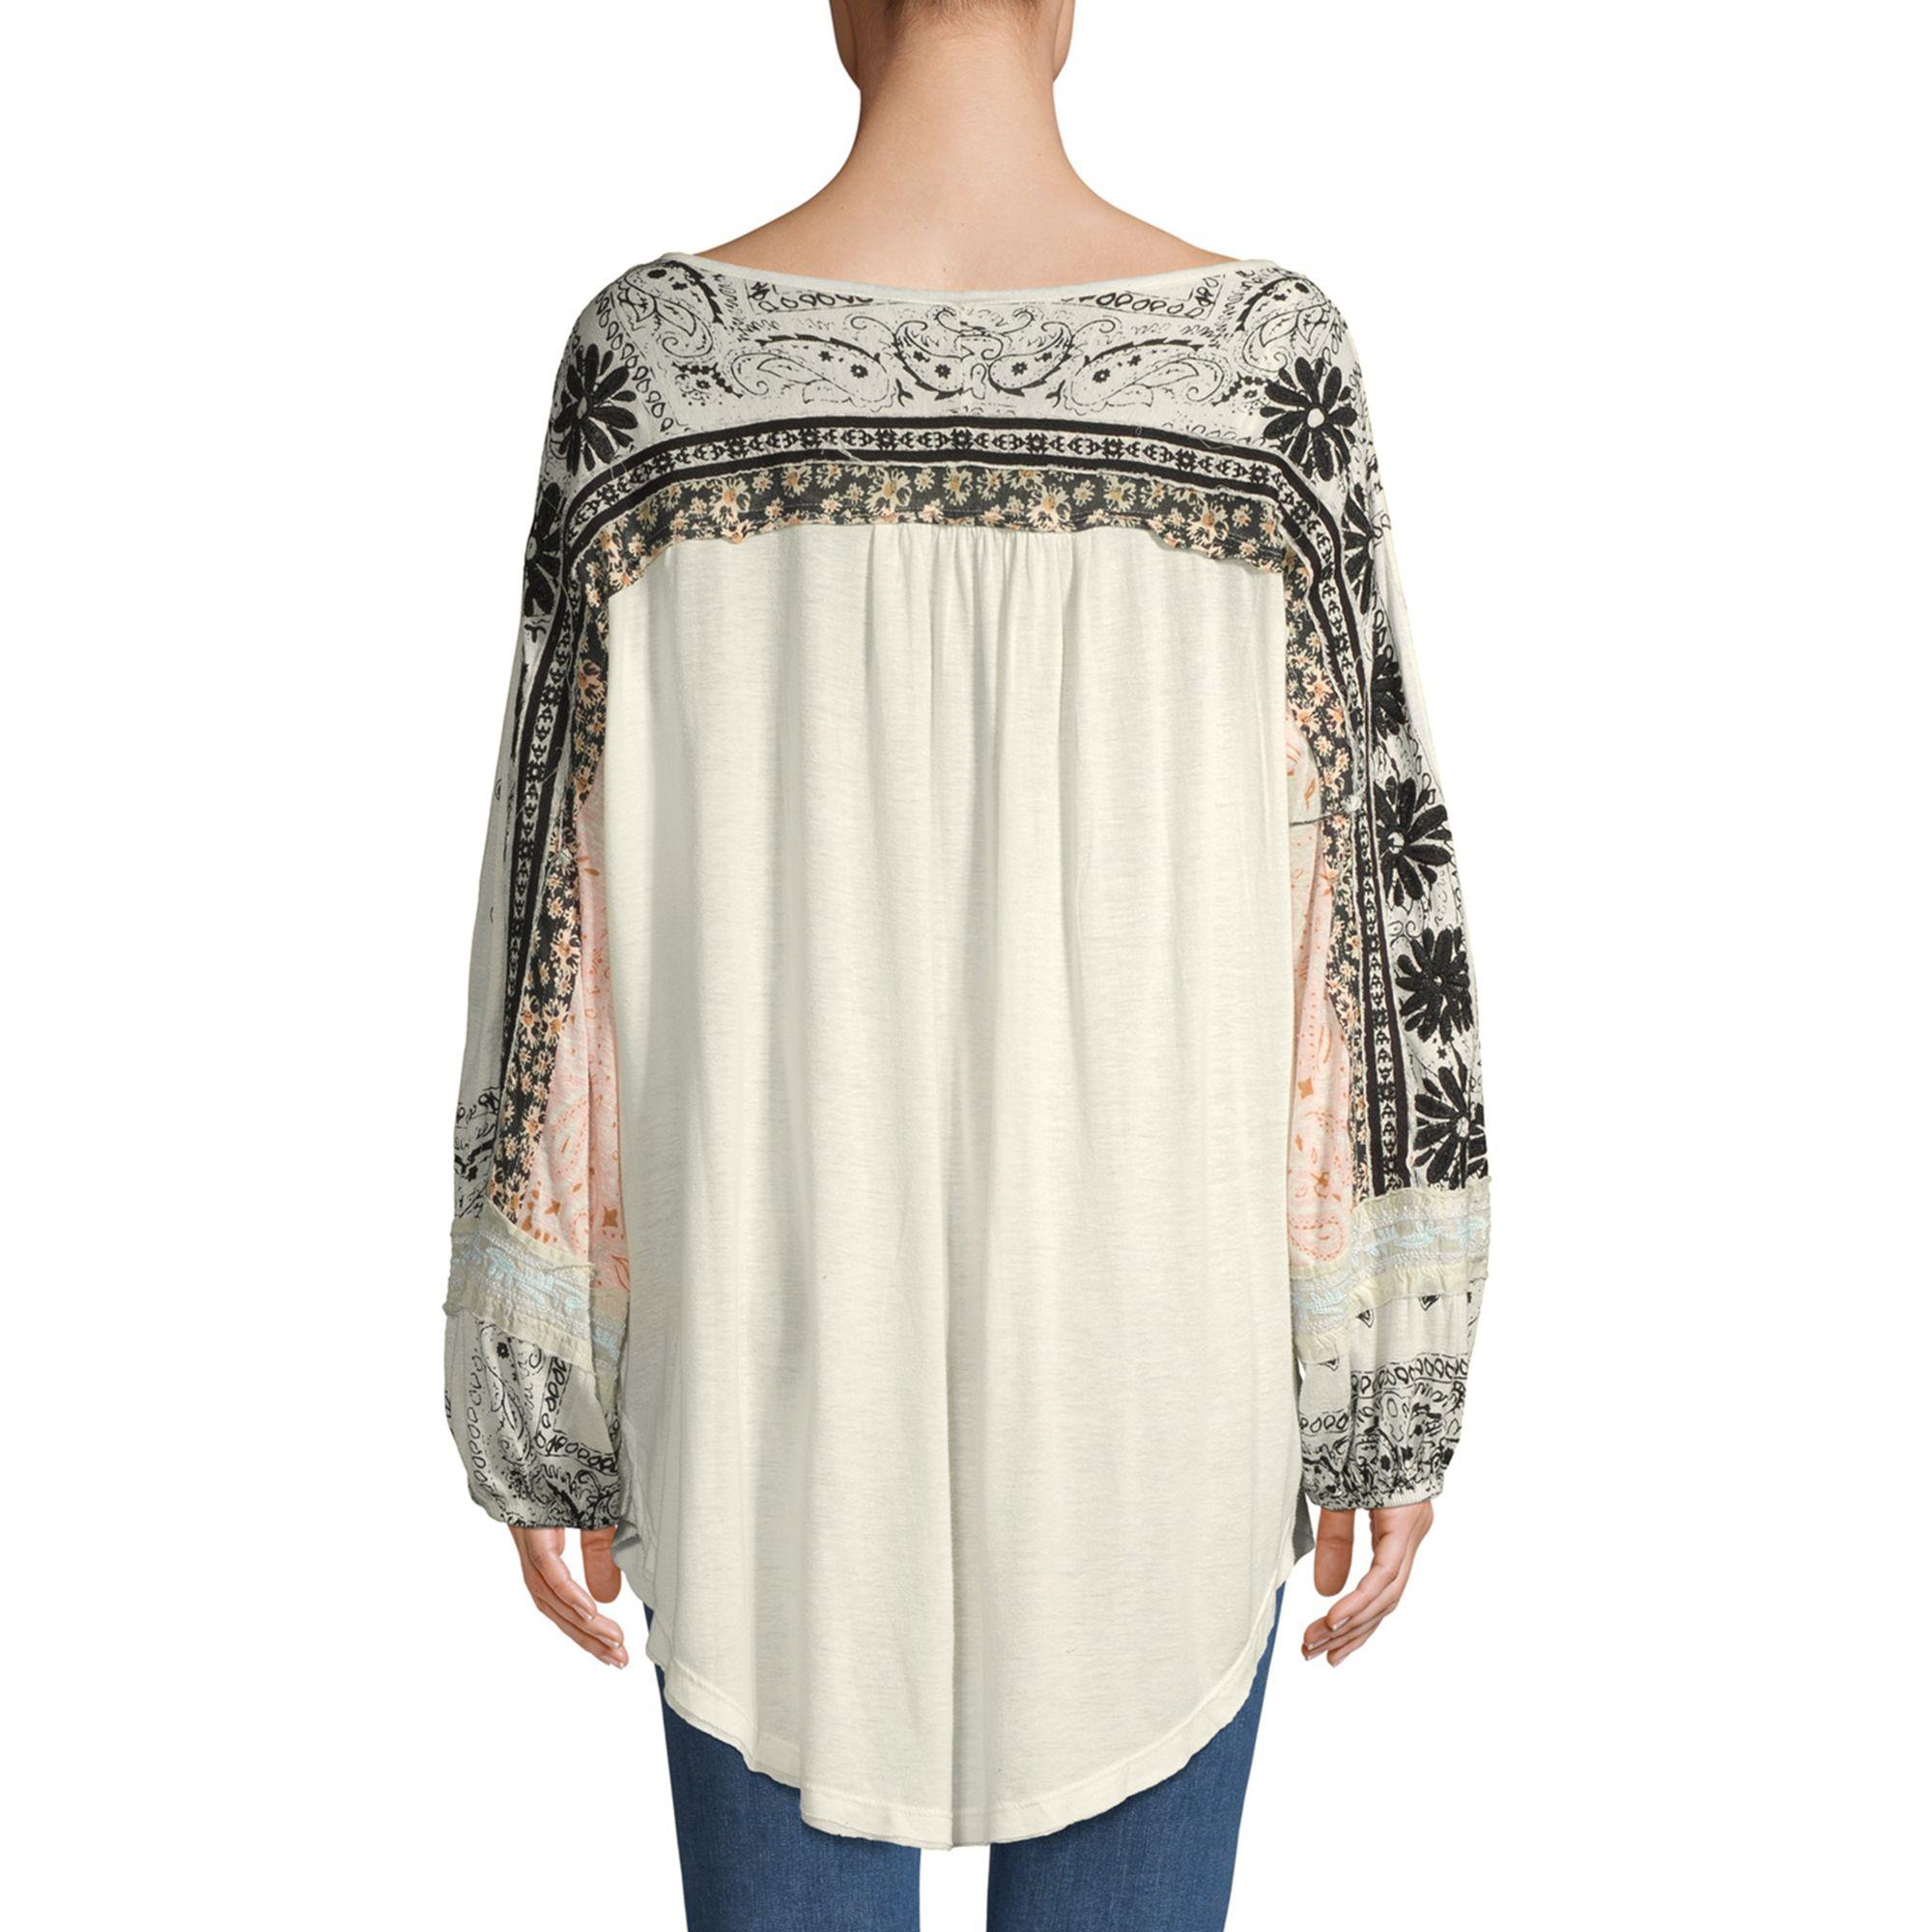 Free People Lace Tripoli Top - Lyst